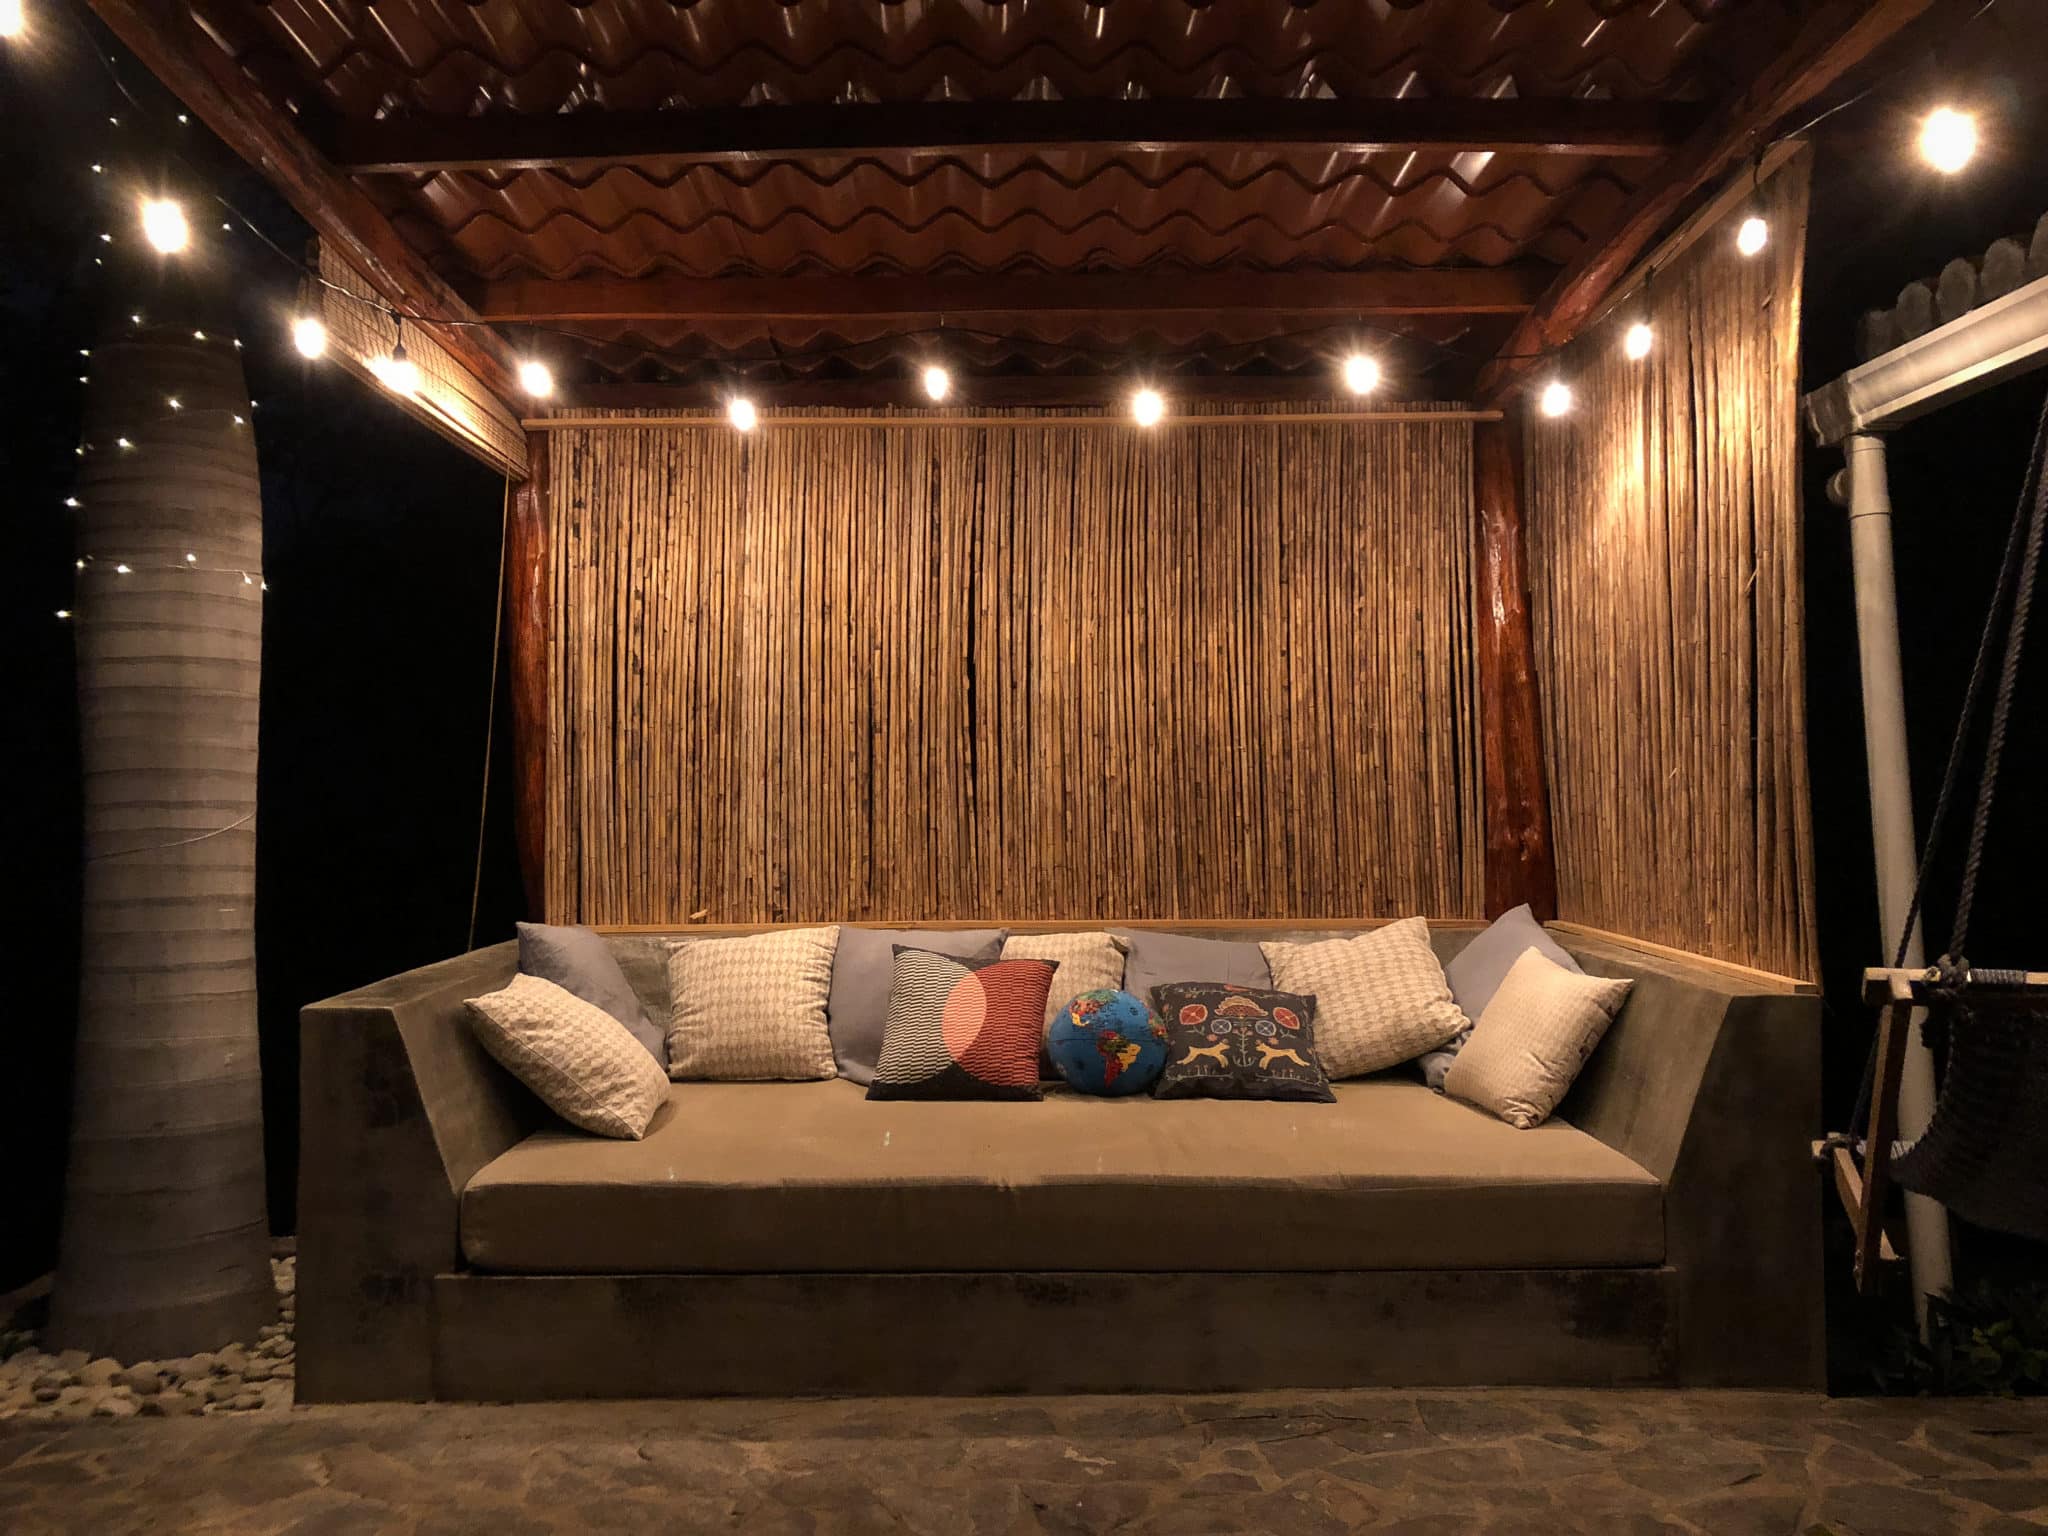 An outside sette with pillows and canopy